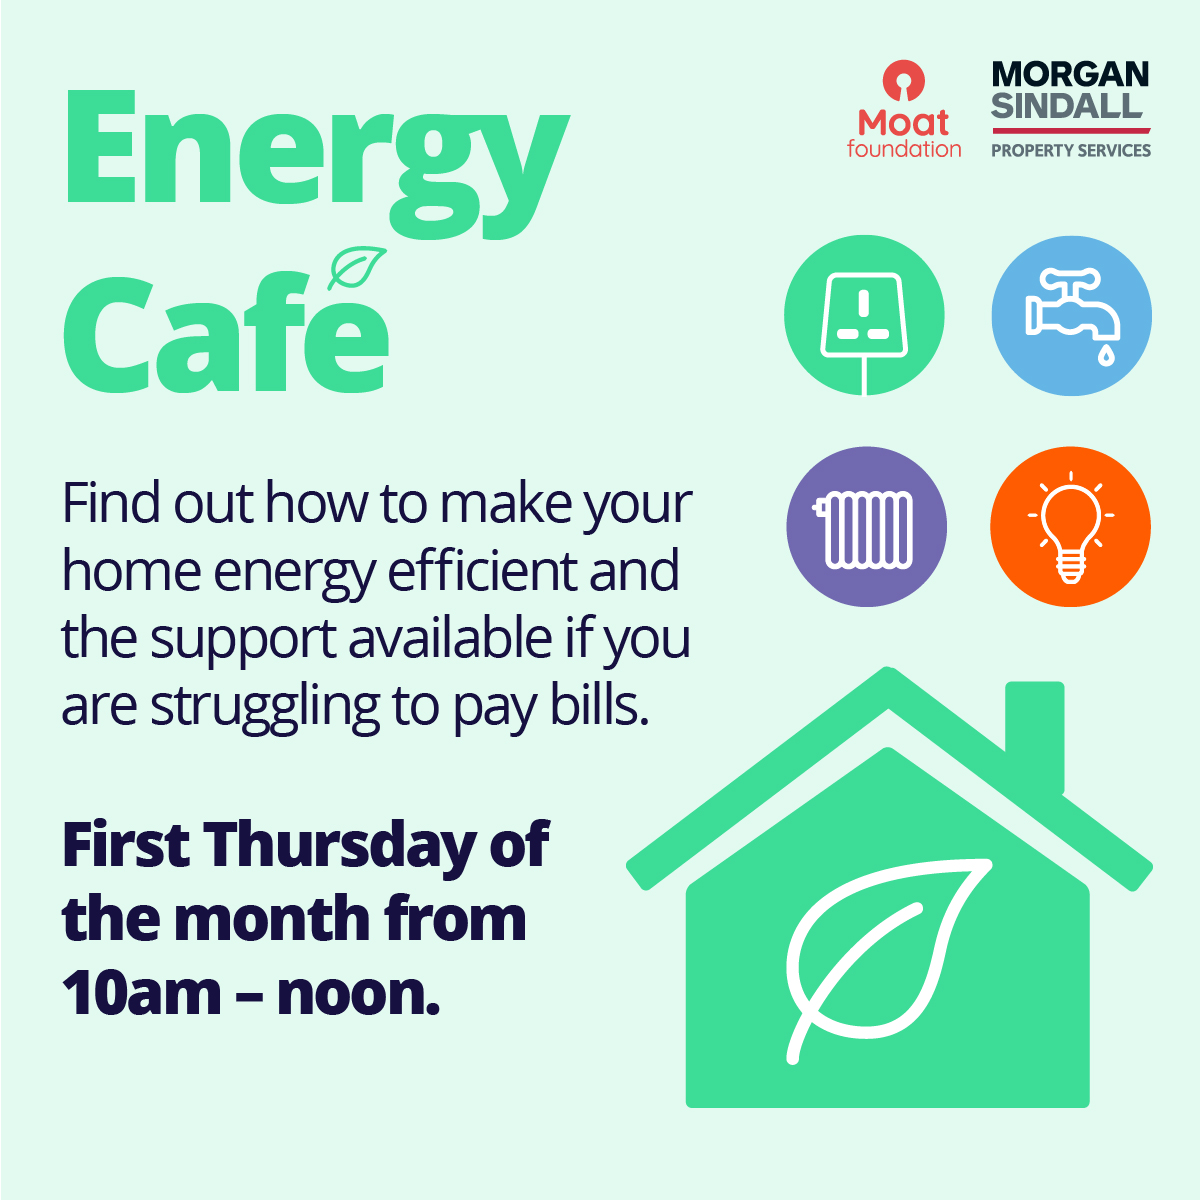 Morgan Sindall Property Services and Moat Foundation are running an Energy Café for our customers in Gillingham to provide advice and support on energy awareness. Join the session tomorrow, Thursday 5 May, at Gillingham Community Hub 10am - 12pm @morgansindallps @MoatFoundation